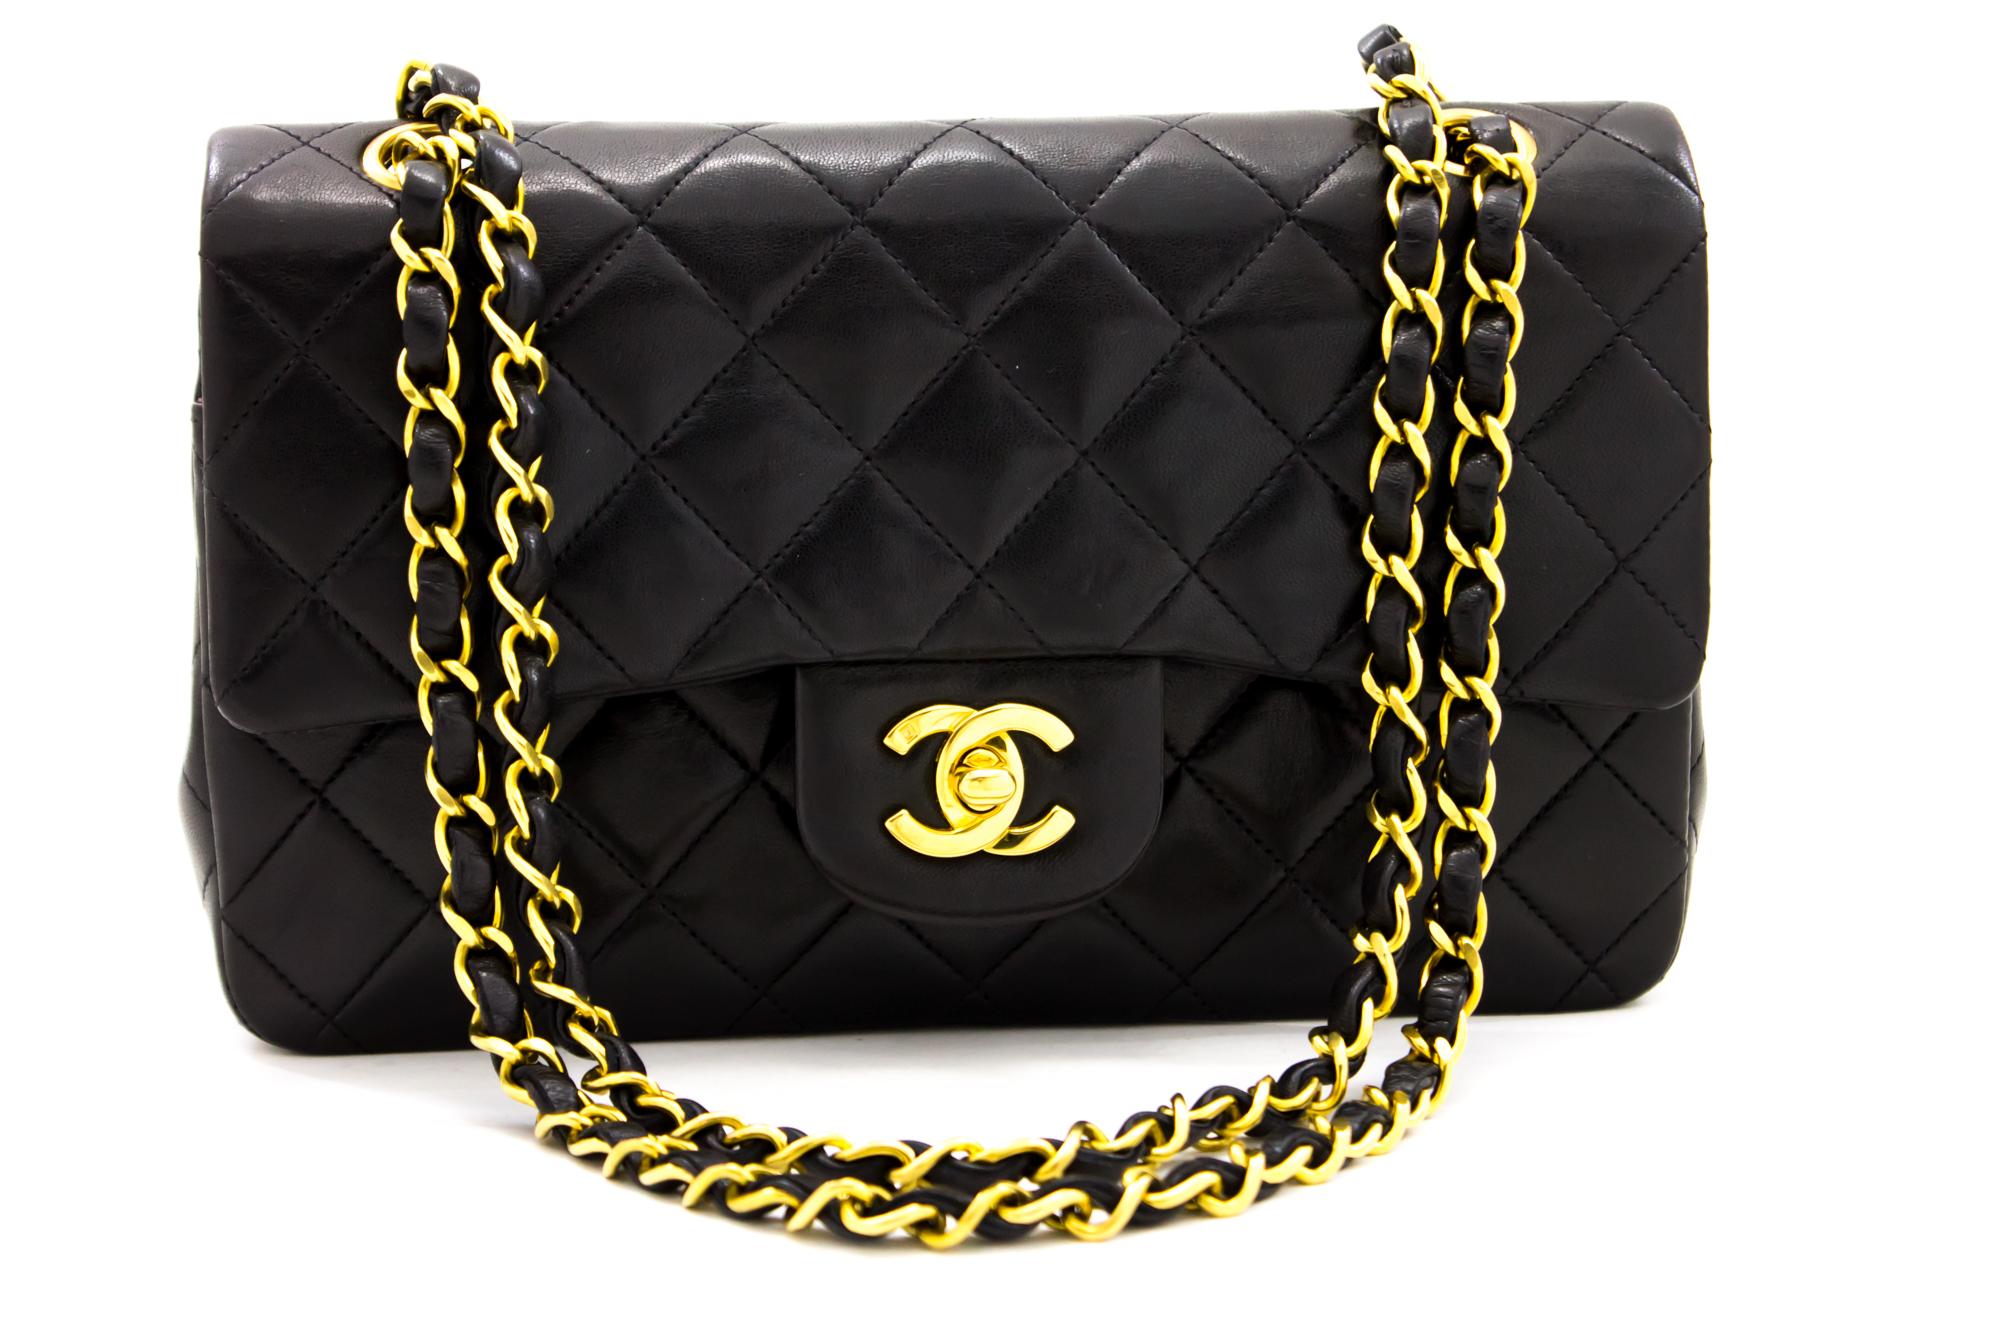 An authentic CHANEL 2.55 Classic Double Flap 9